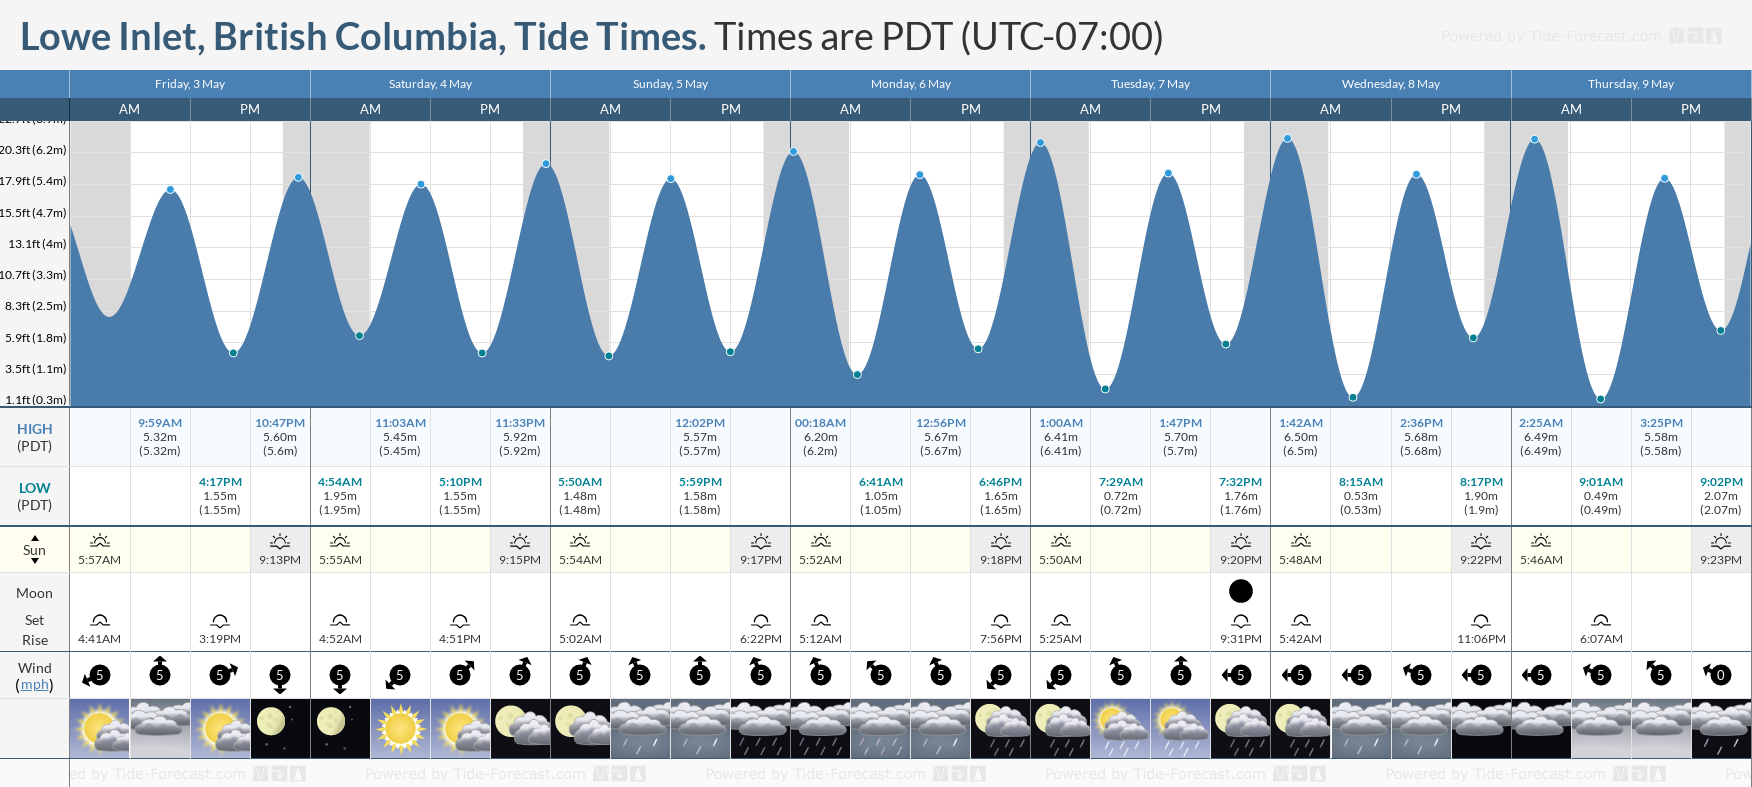 Lowe Inlet, British Columbia Tide Chart including high and low tide tide times for the next 7 days